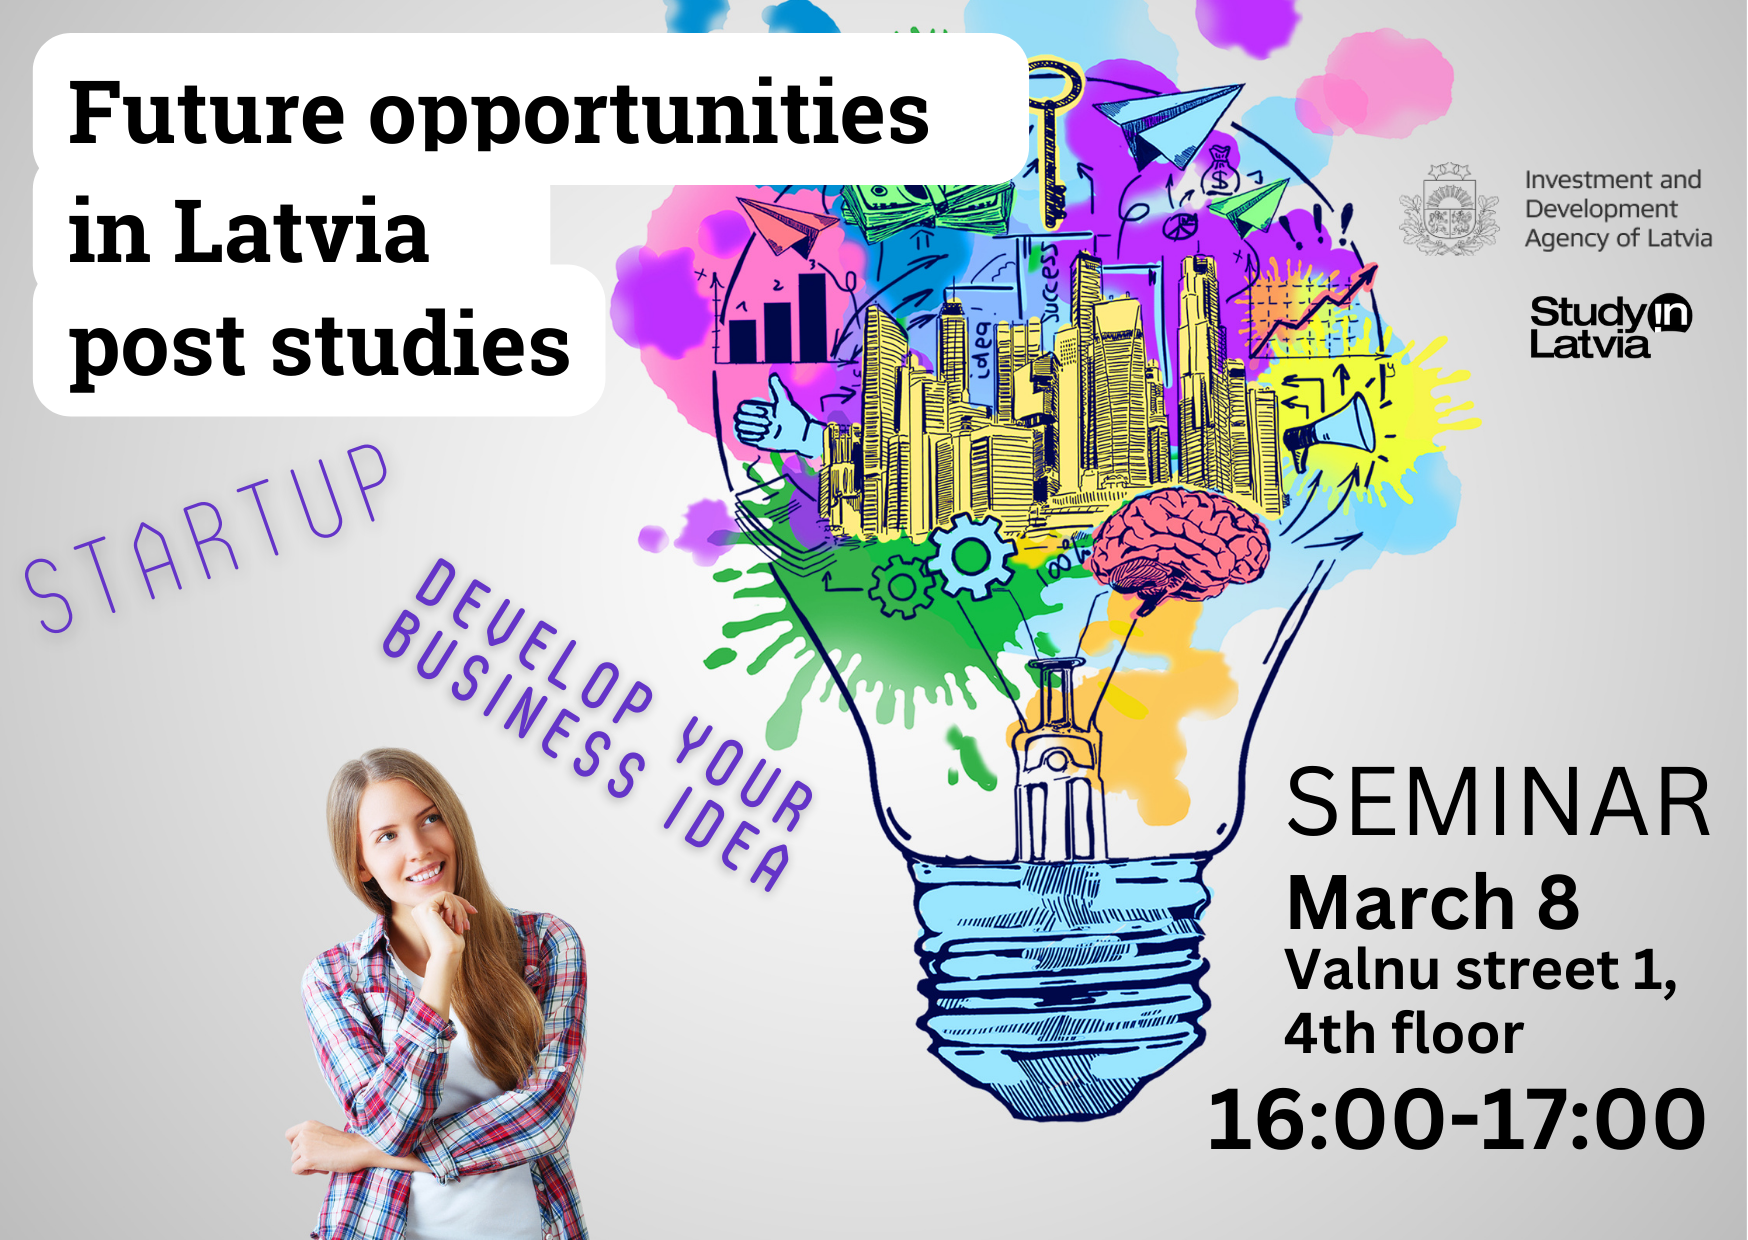 Your future opportunities in Latvia post studies